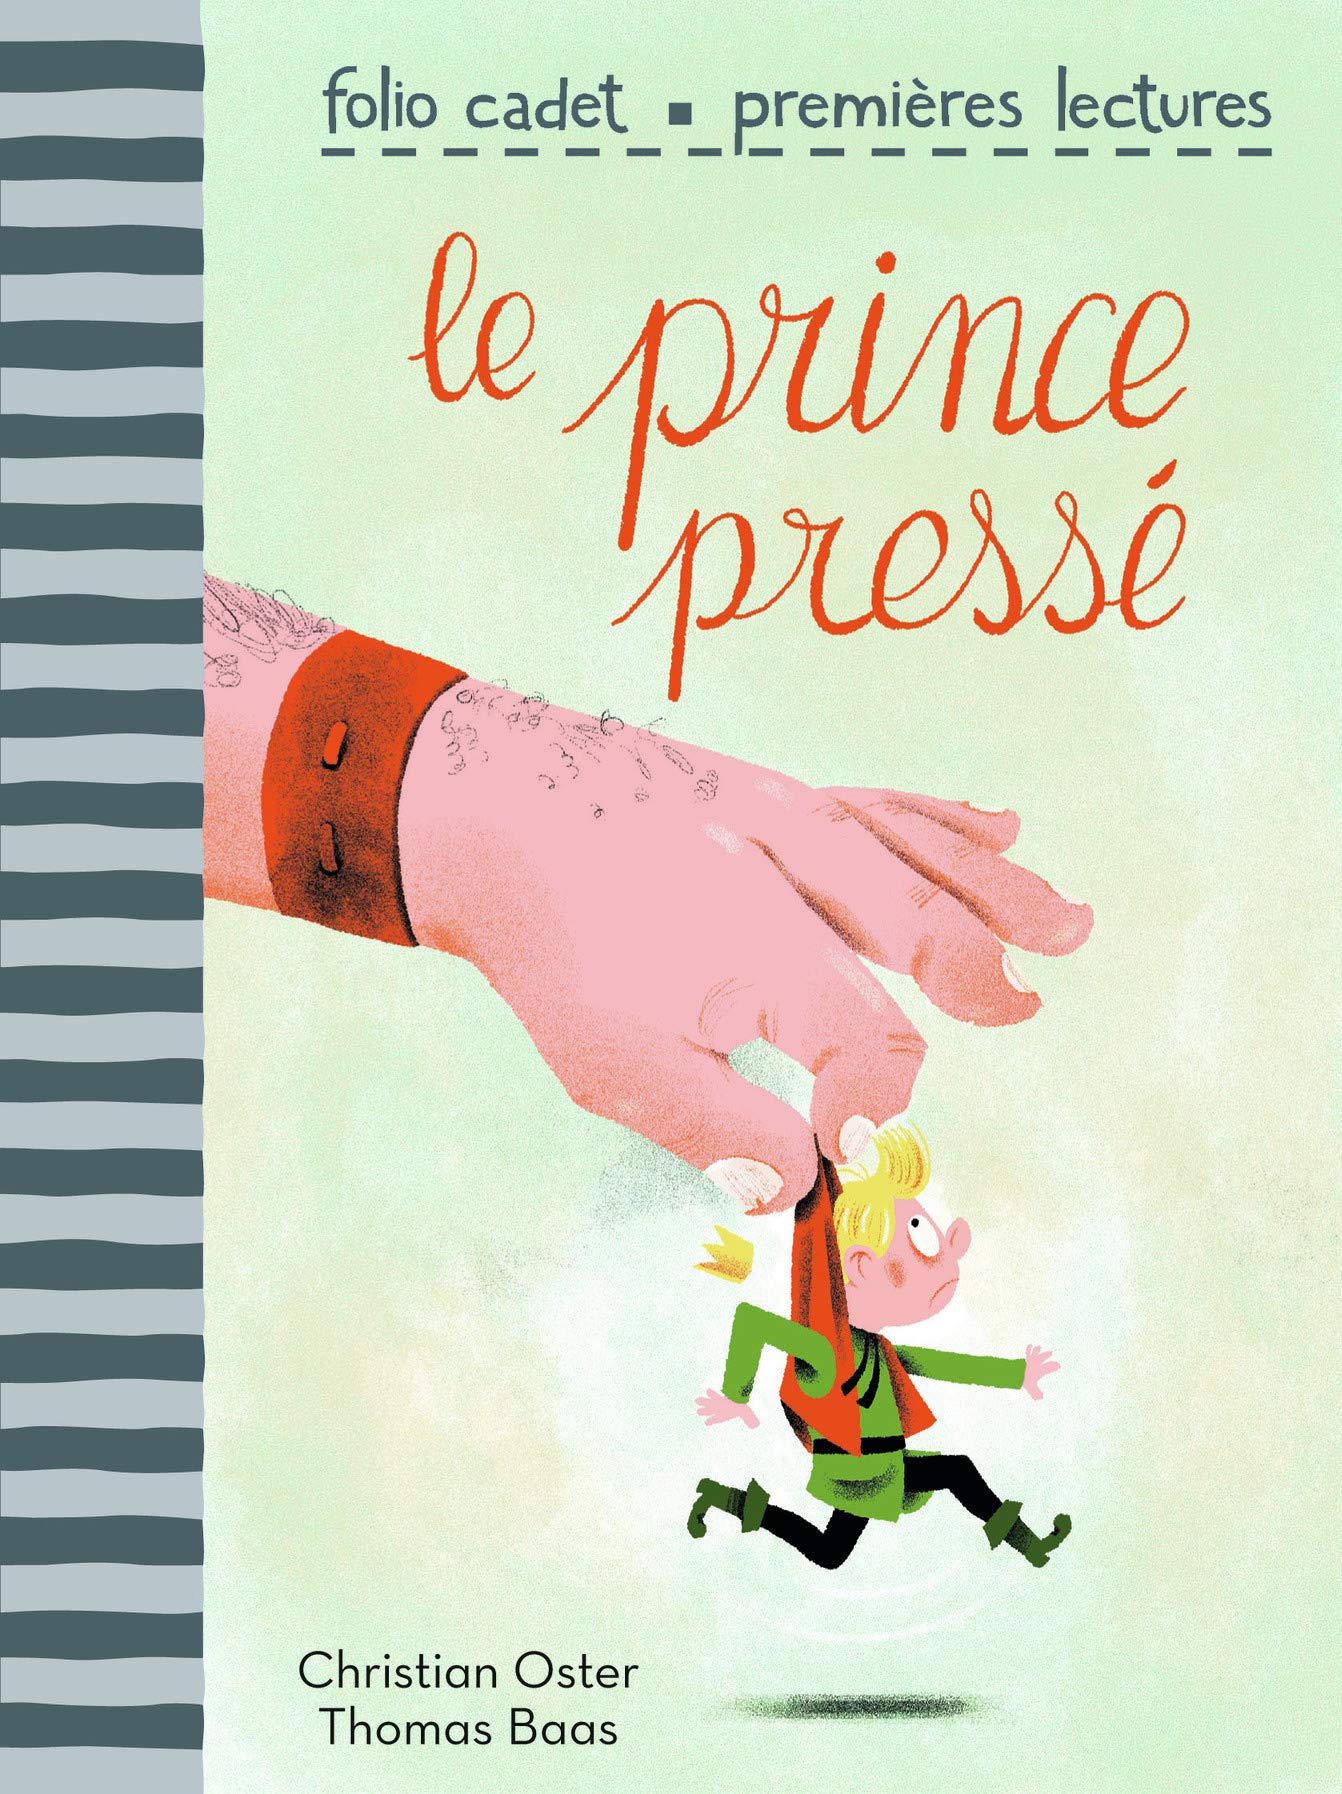 Le prince presse | Christian Oster